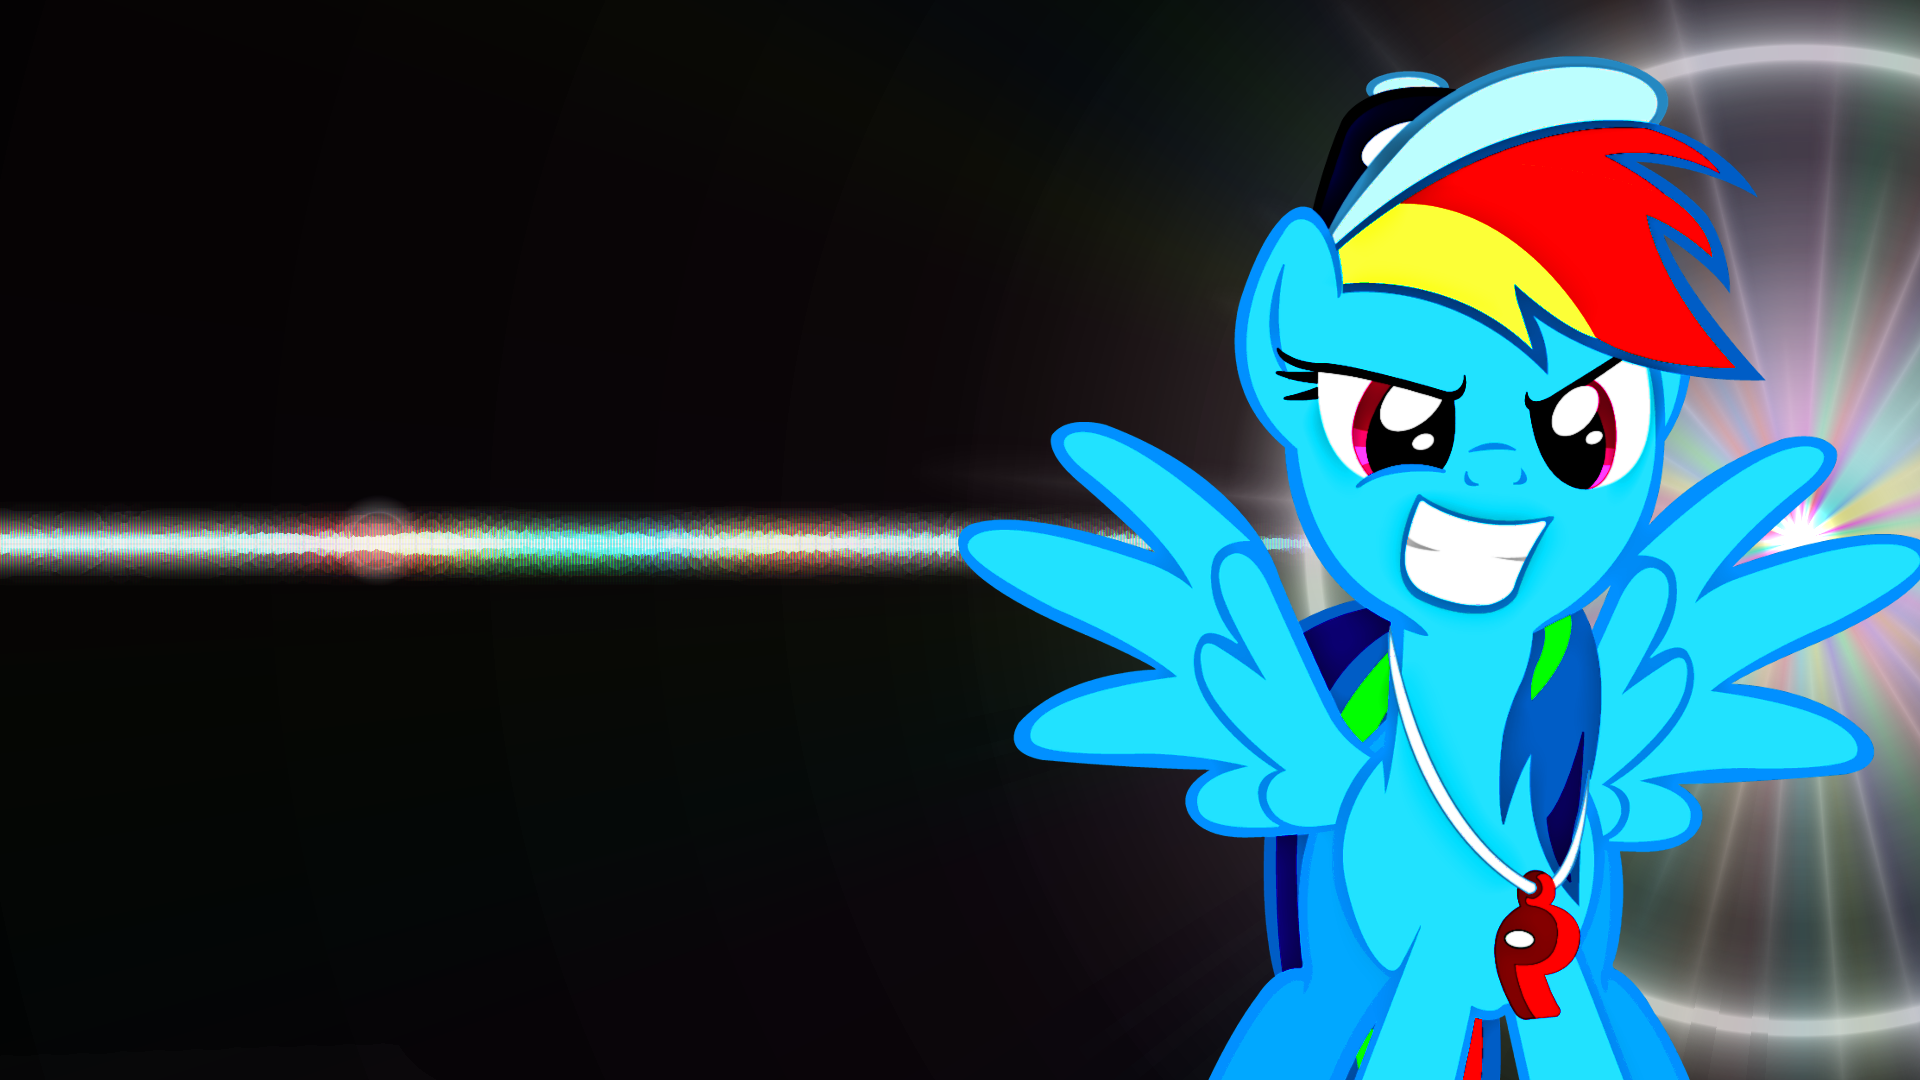 Shiny-shiny pretty lights wallpaper pack. by Clueless313 and MasterRottweiler